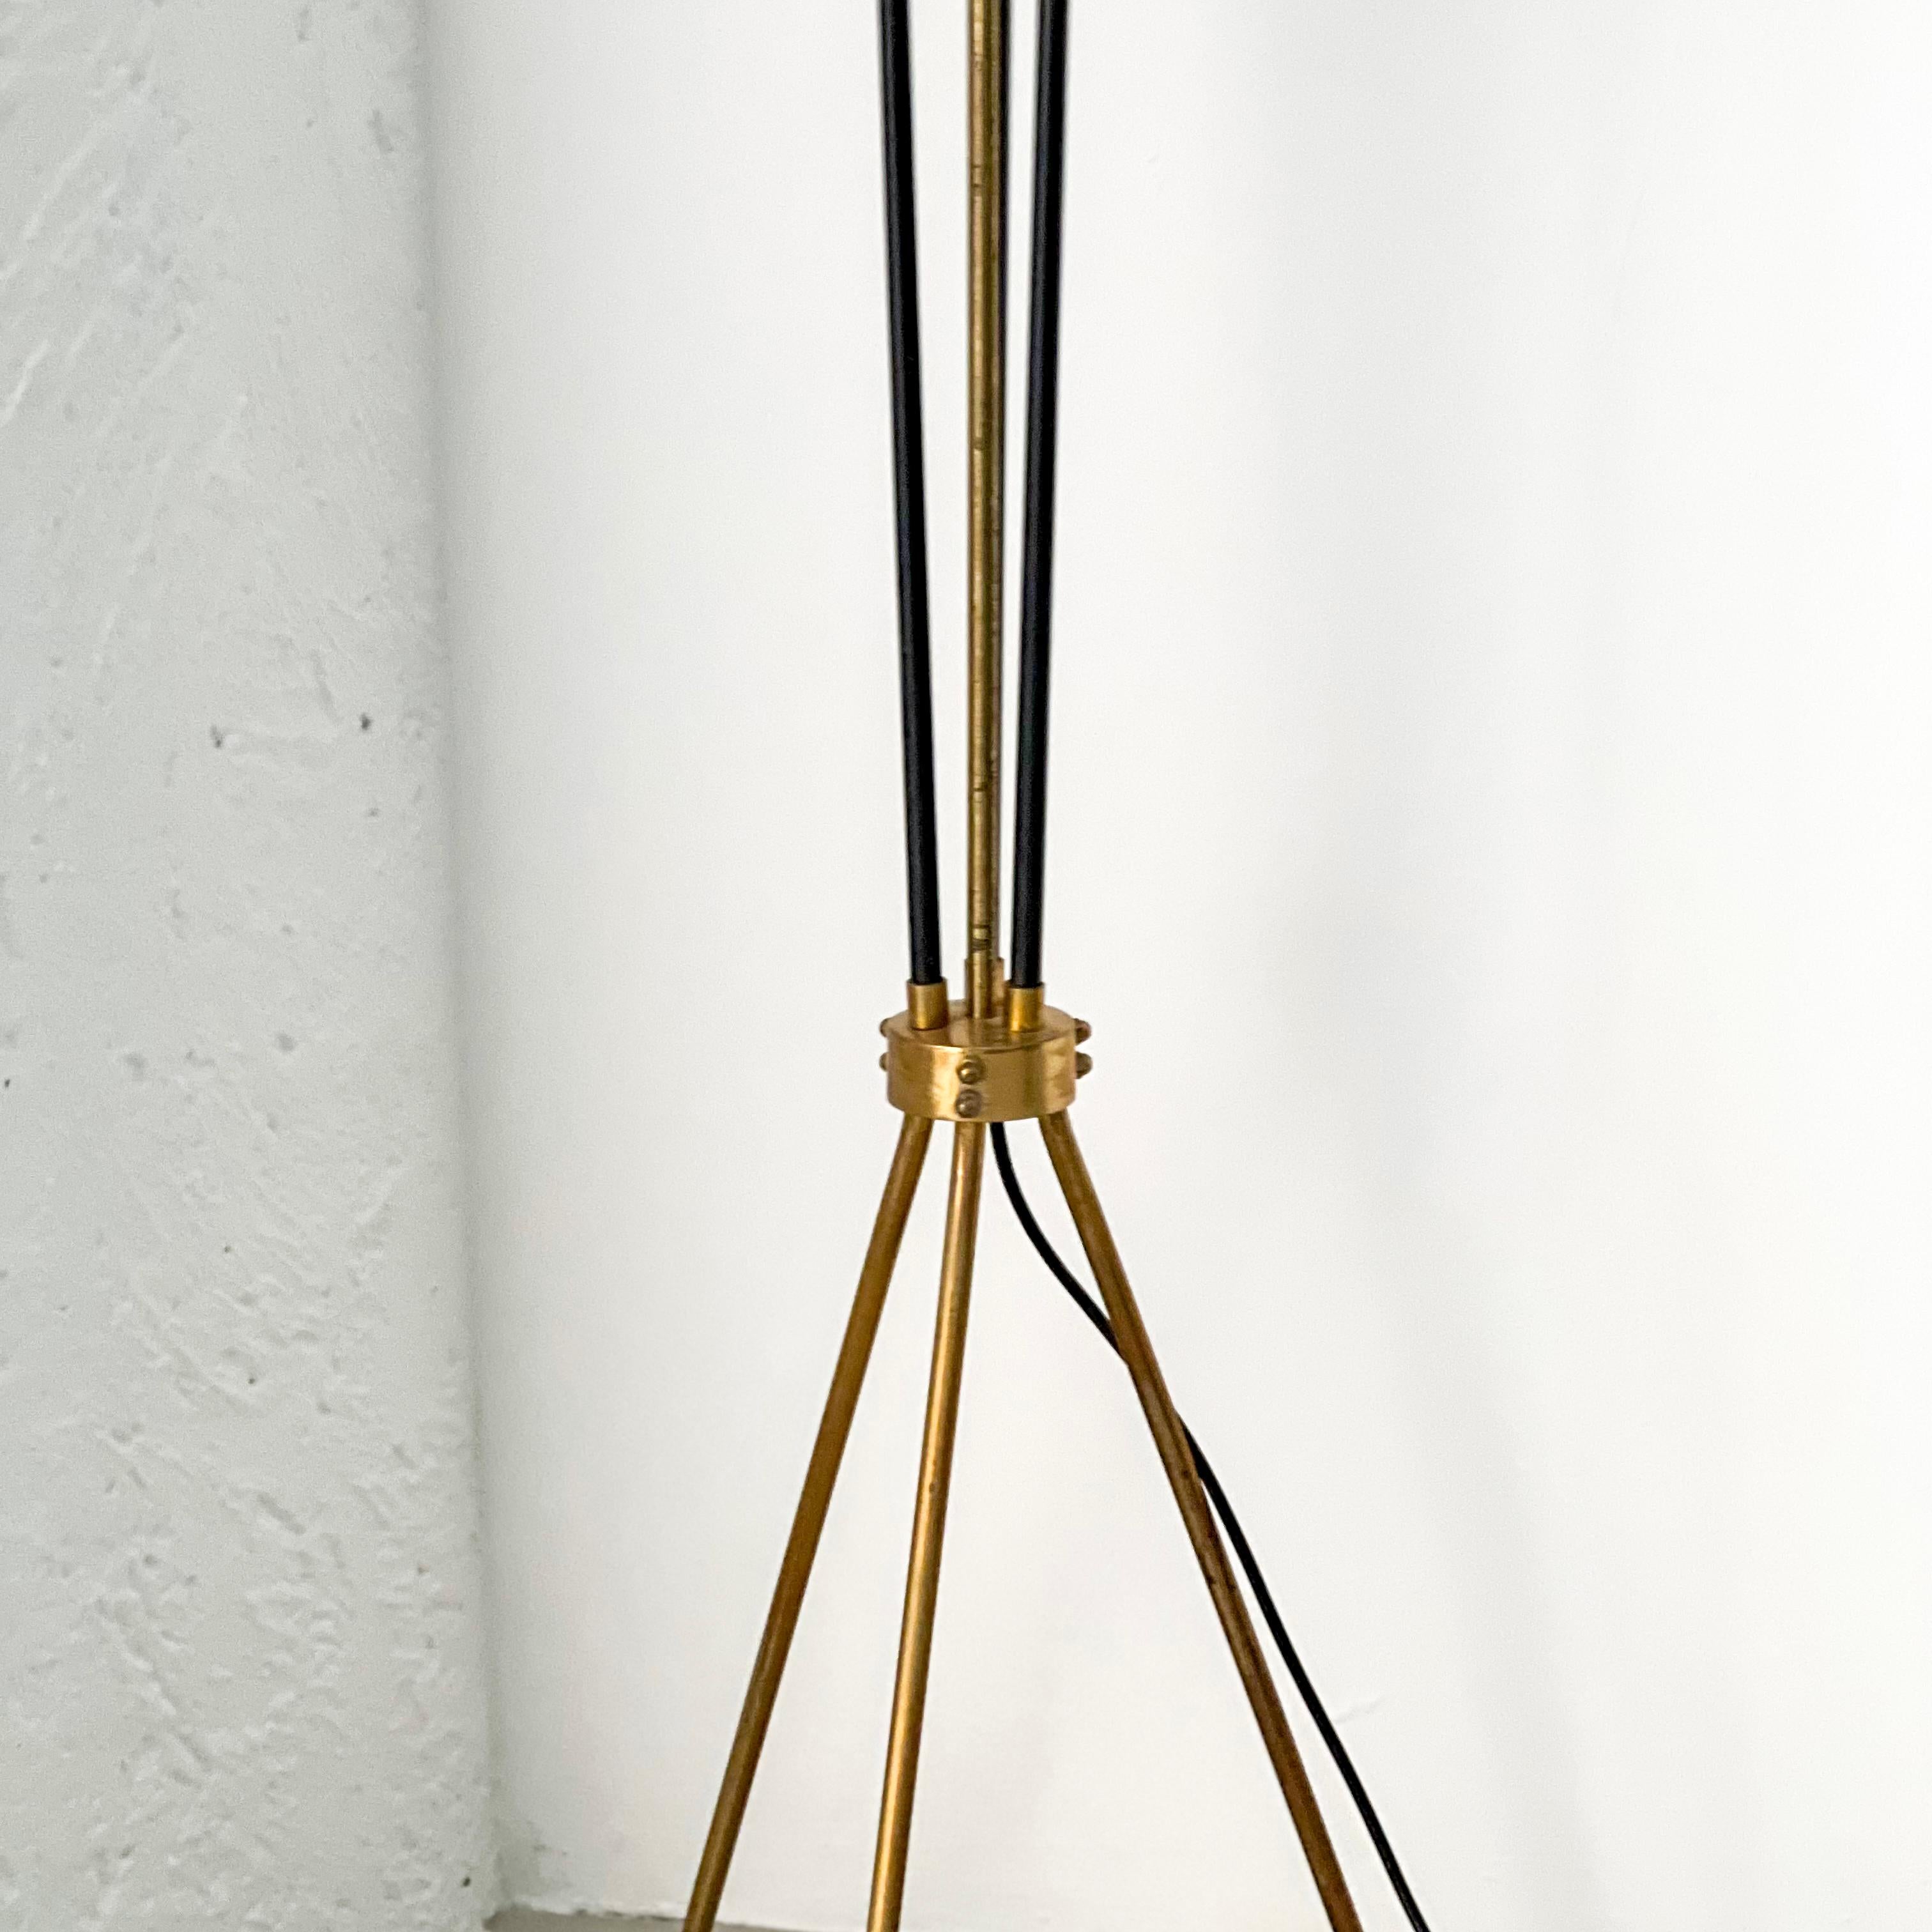 Vintage Italian Brass Floor Lamp in the style of Stilnovo, three legs, opaline In Good Condition For Sale In Milan, IT